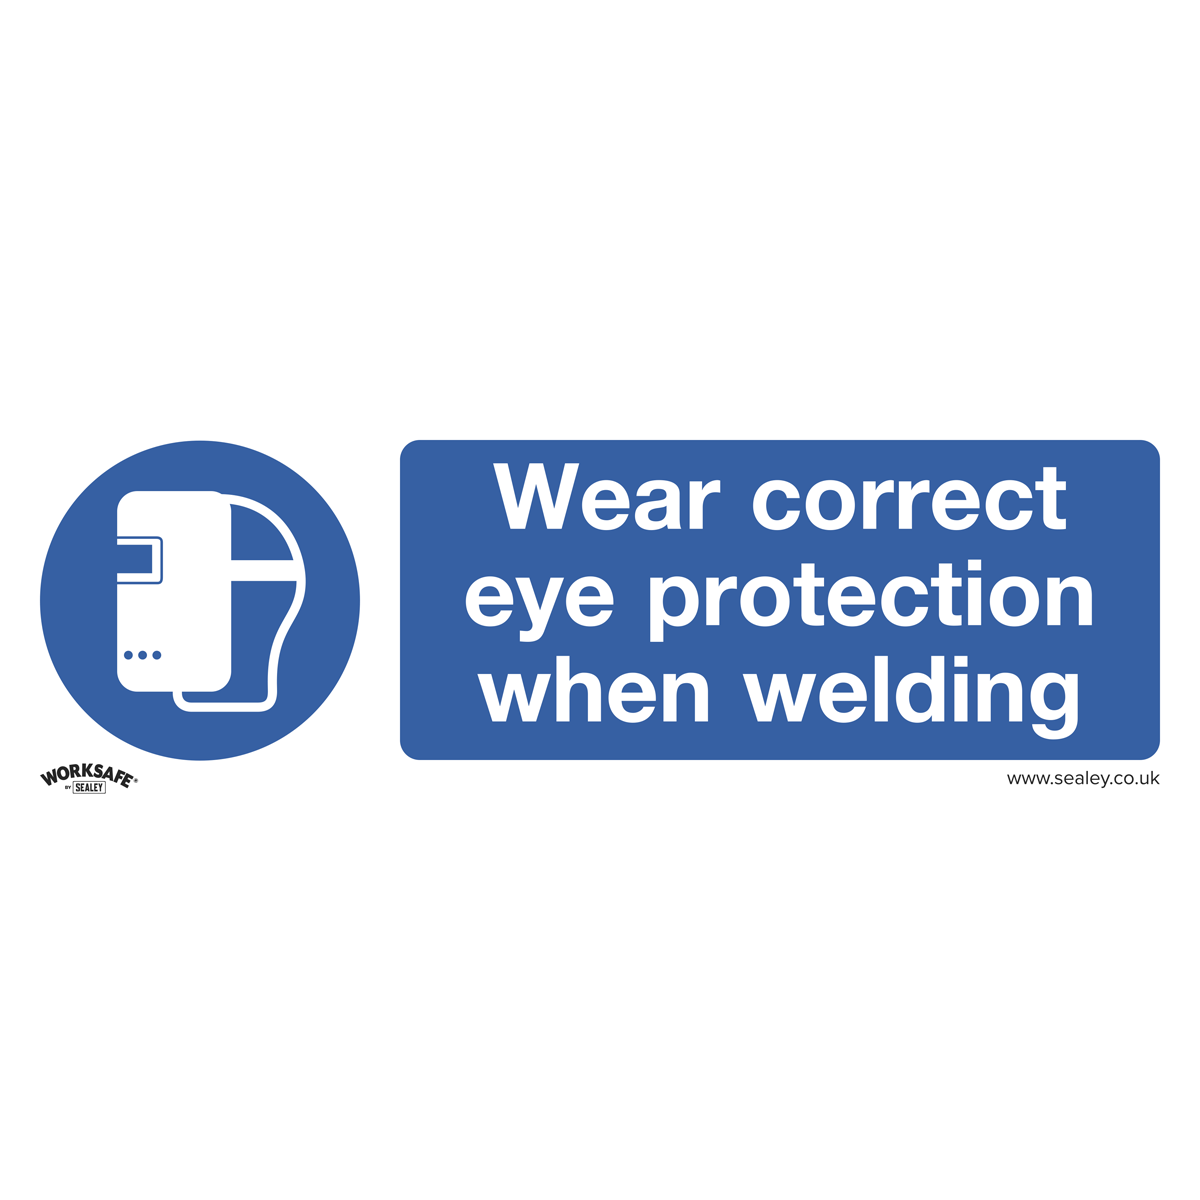 Mandatory Safety Sign - Wear Eye Protection When Welding - Self-Adhesive Vinyl